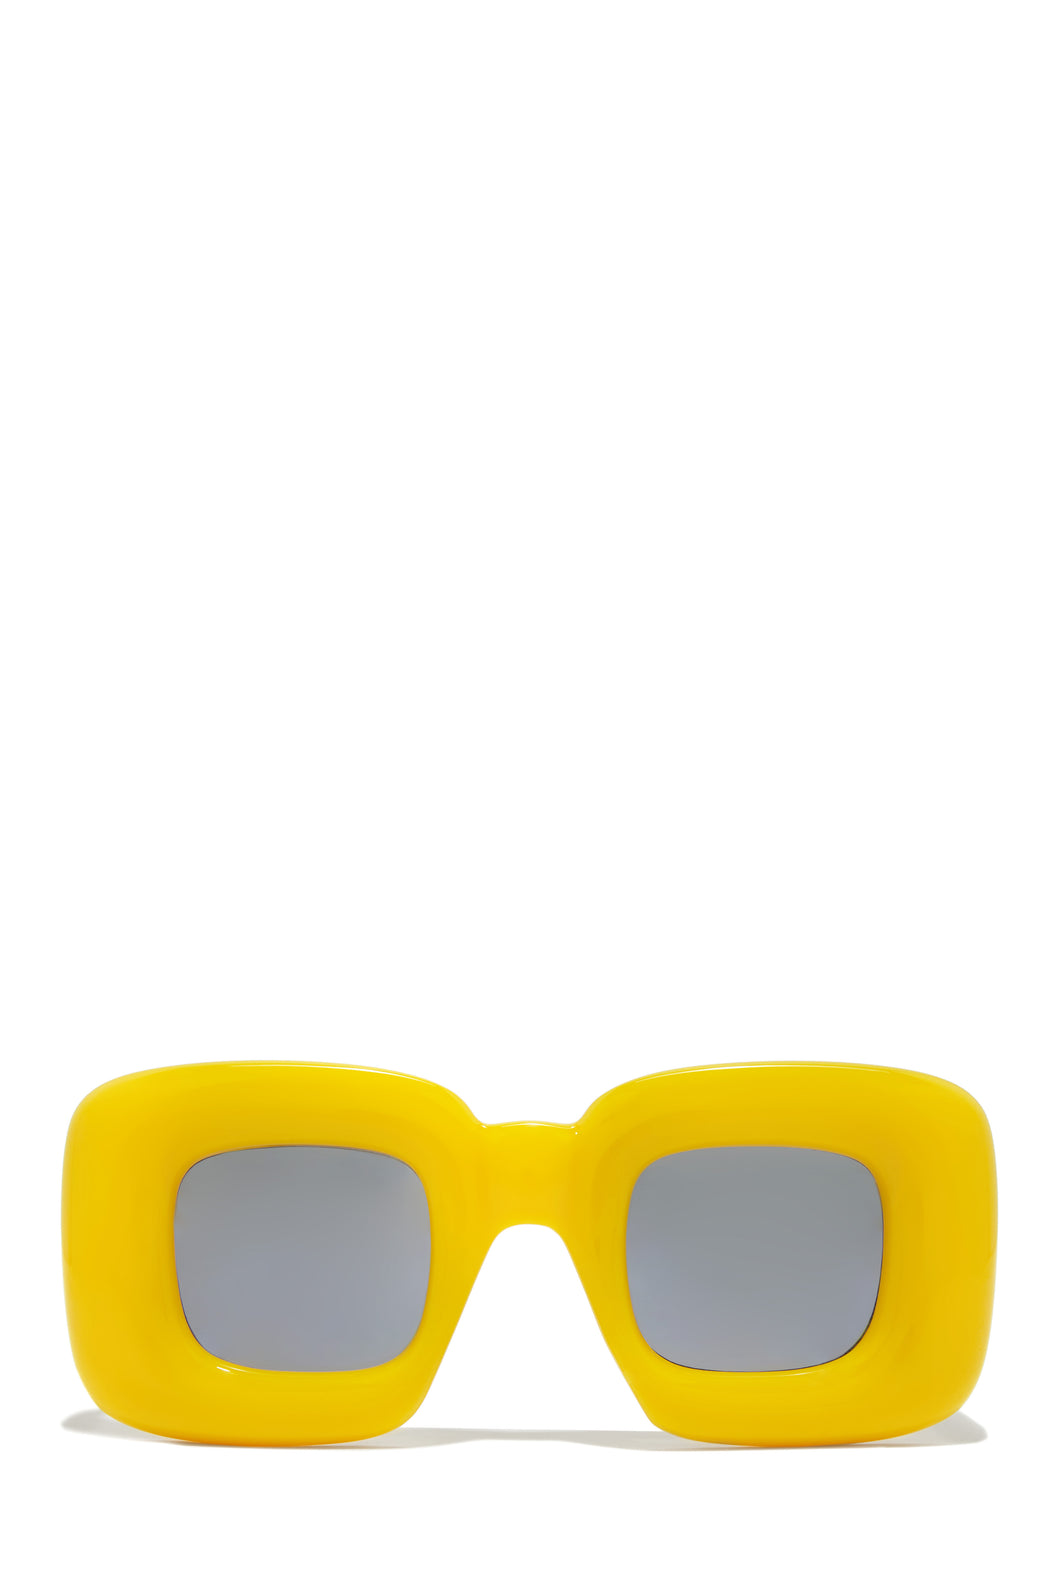 Yellow Sunglasses with Gray Lenses 